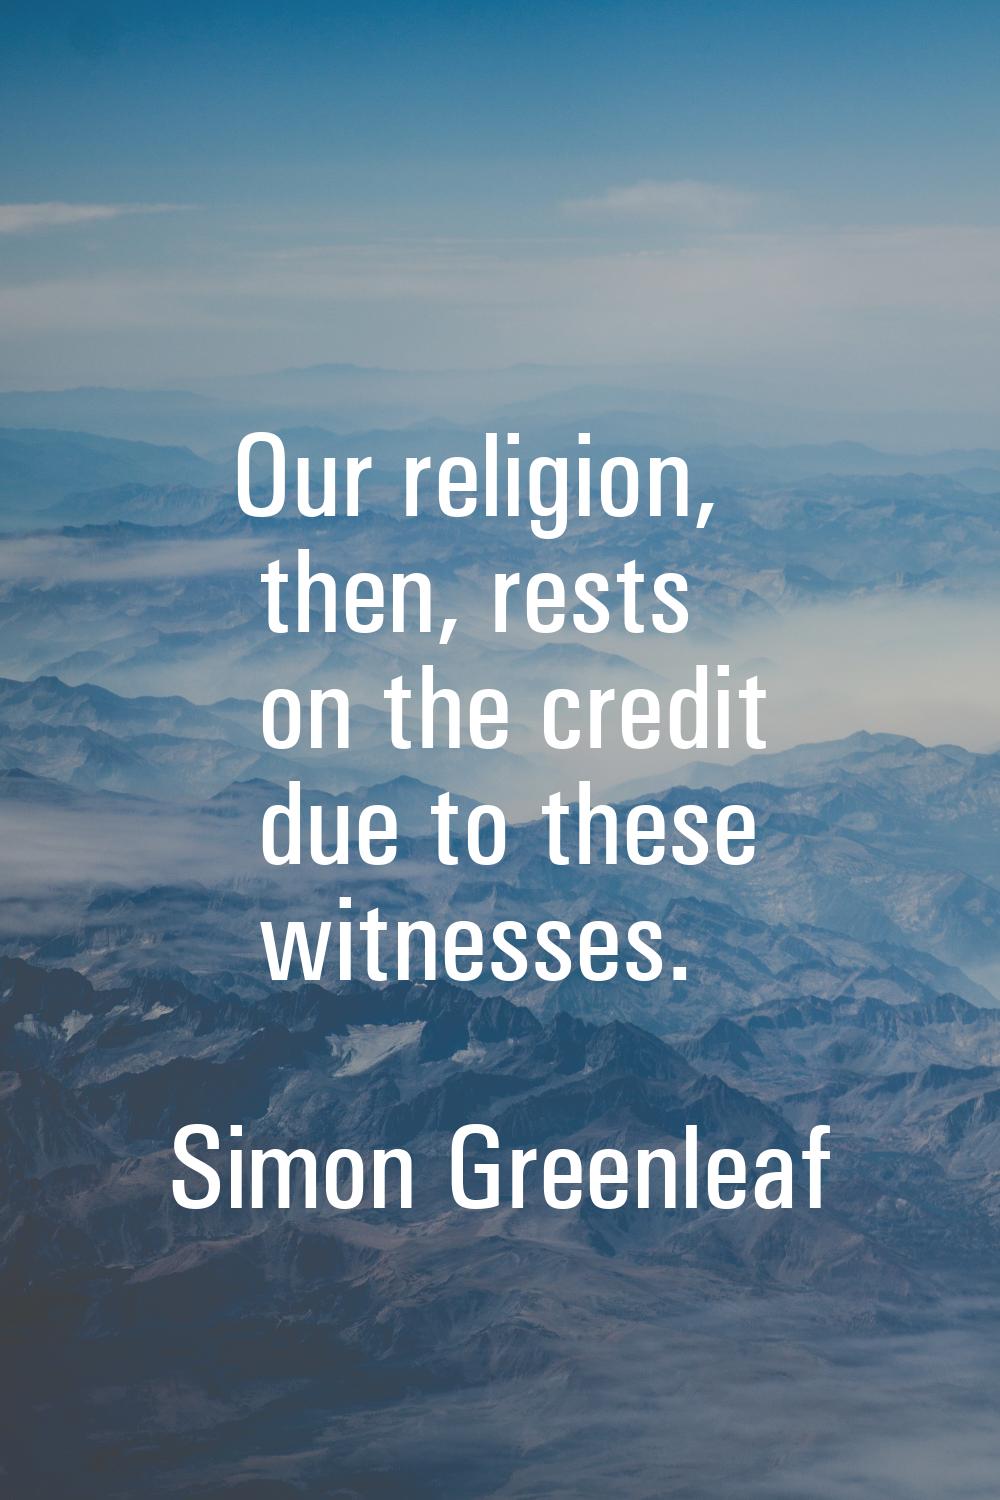 Our religion, then, rests on the credit due to these witnesses.